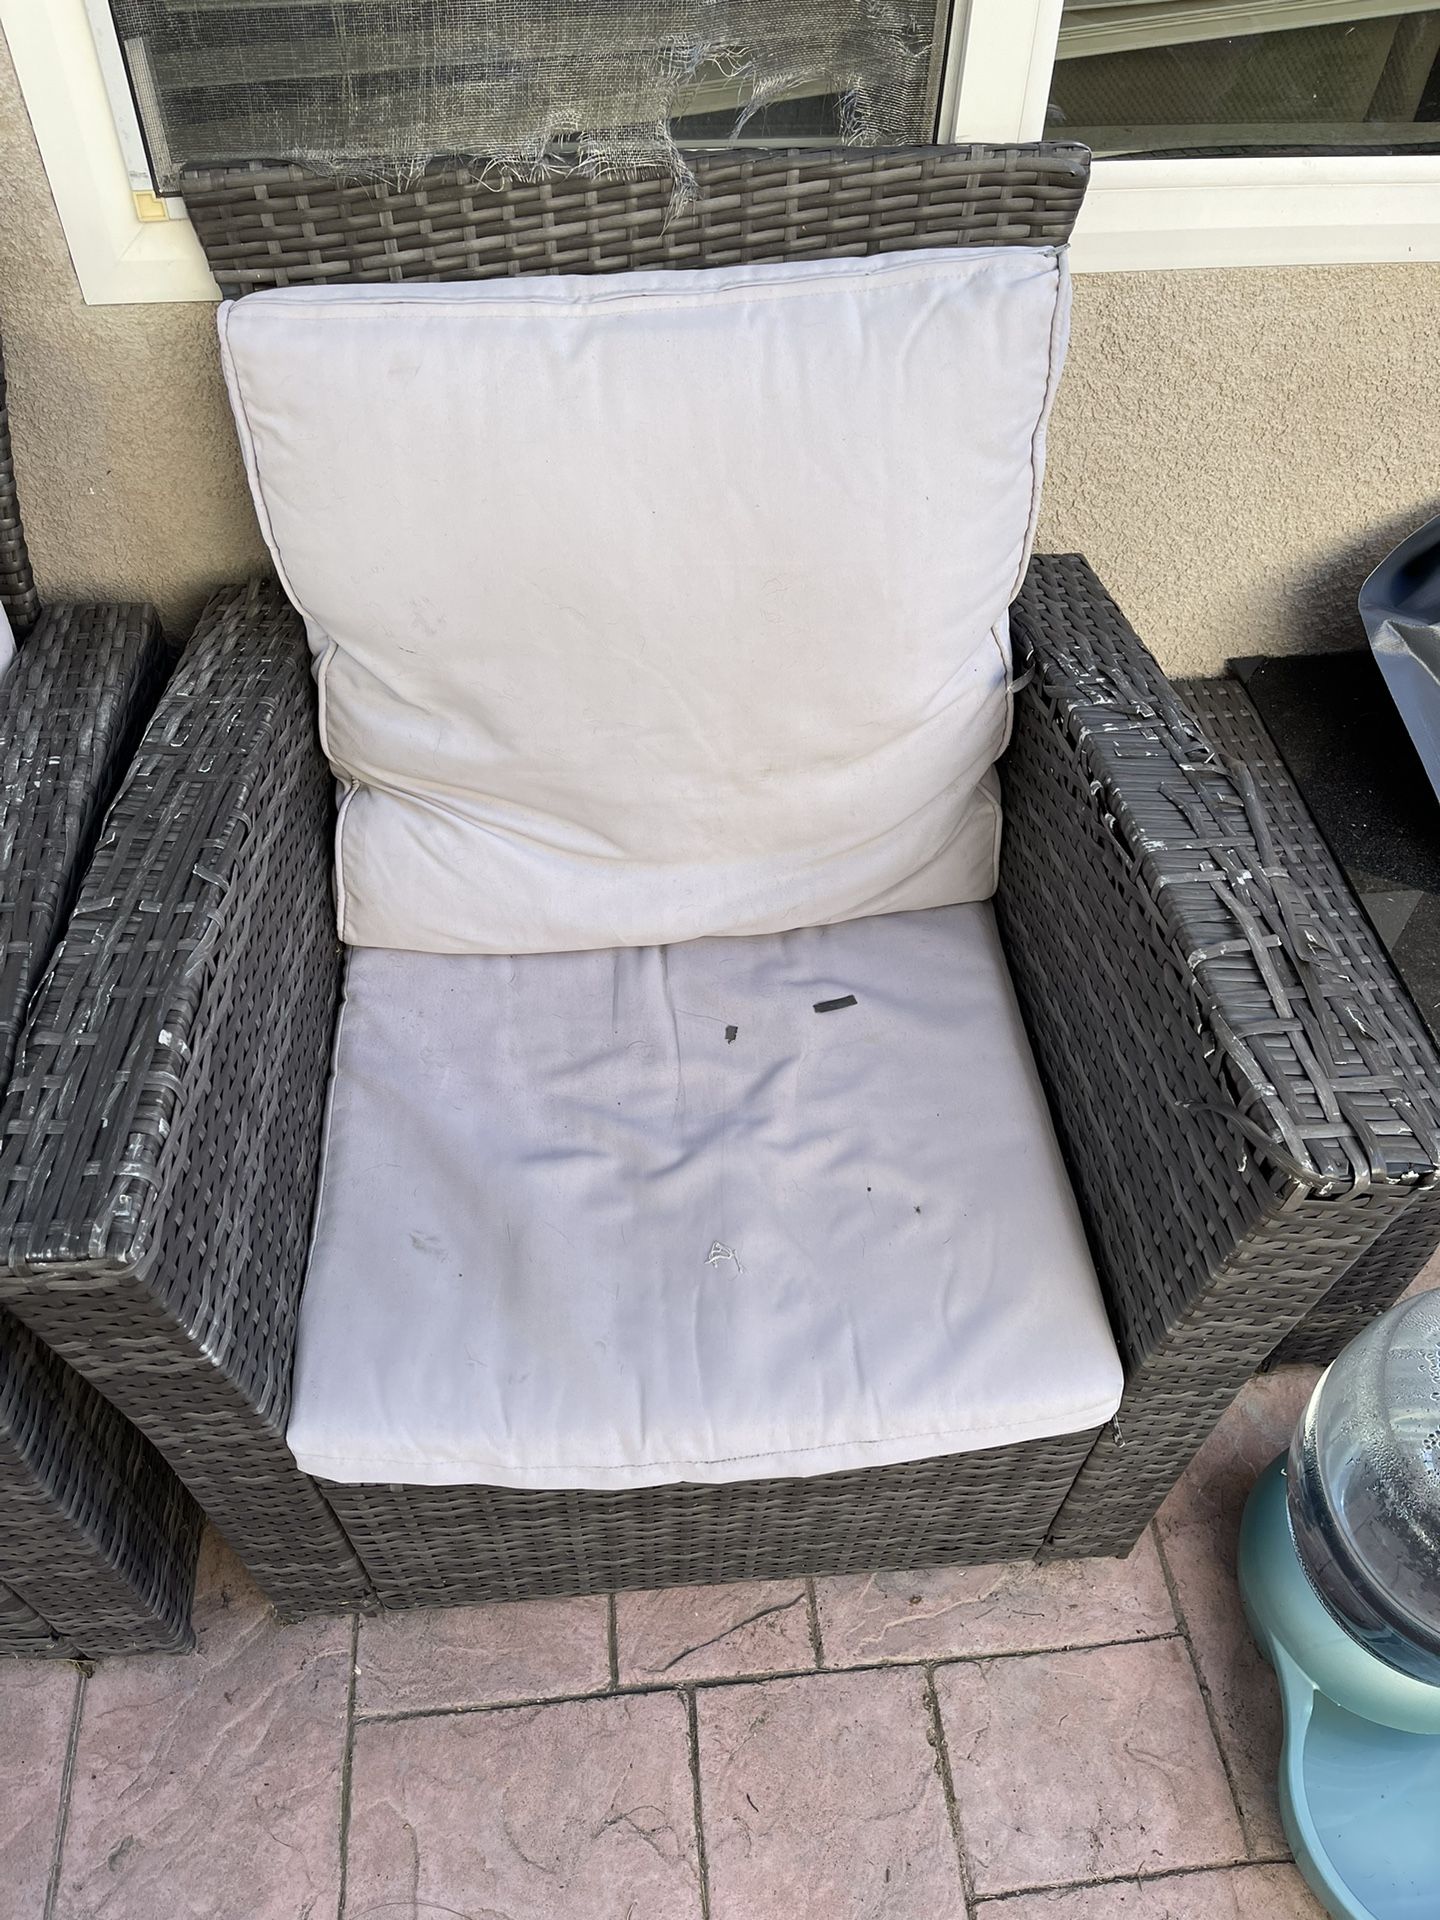 FREE Patio Furniture - Will go Quick. Serious Inquiries Only (4S Ranch)